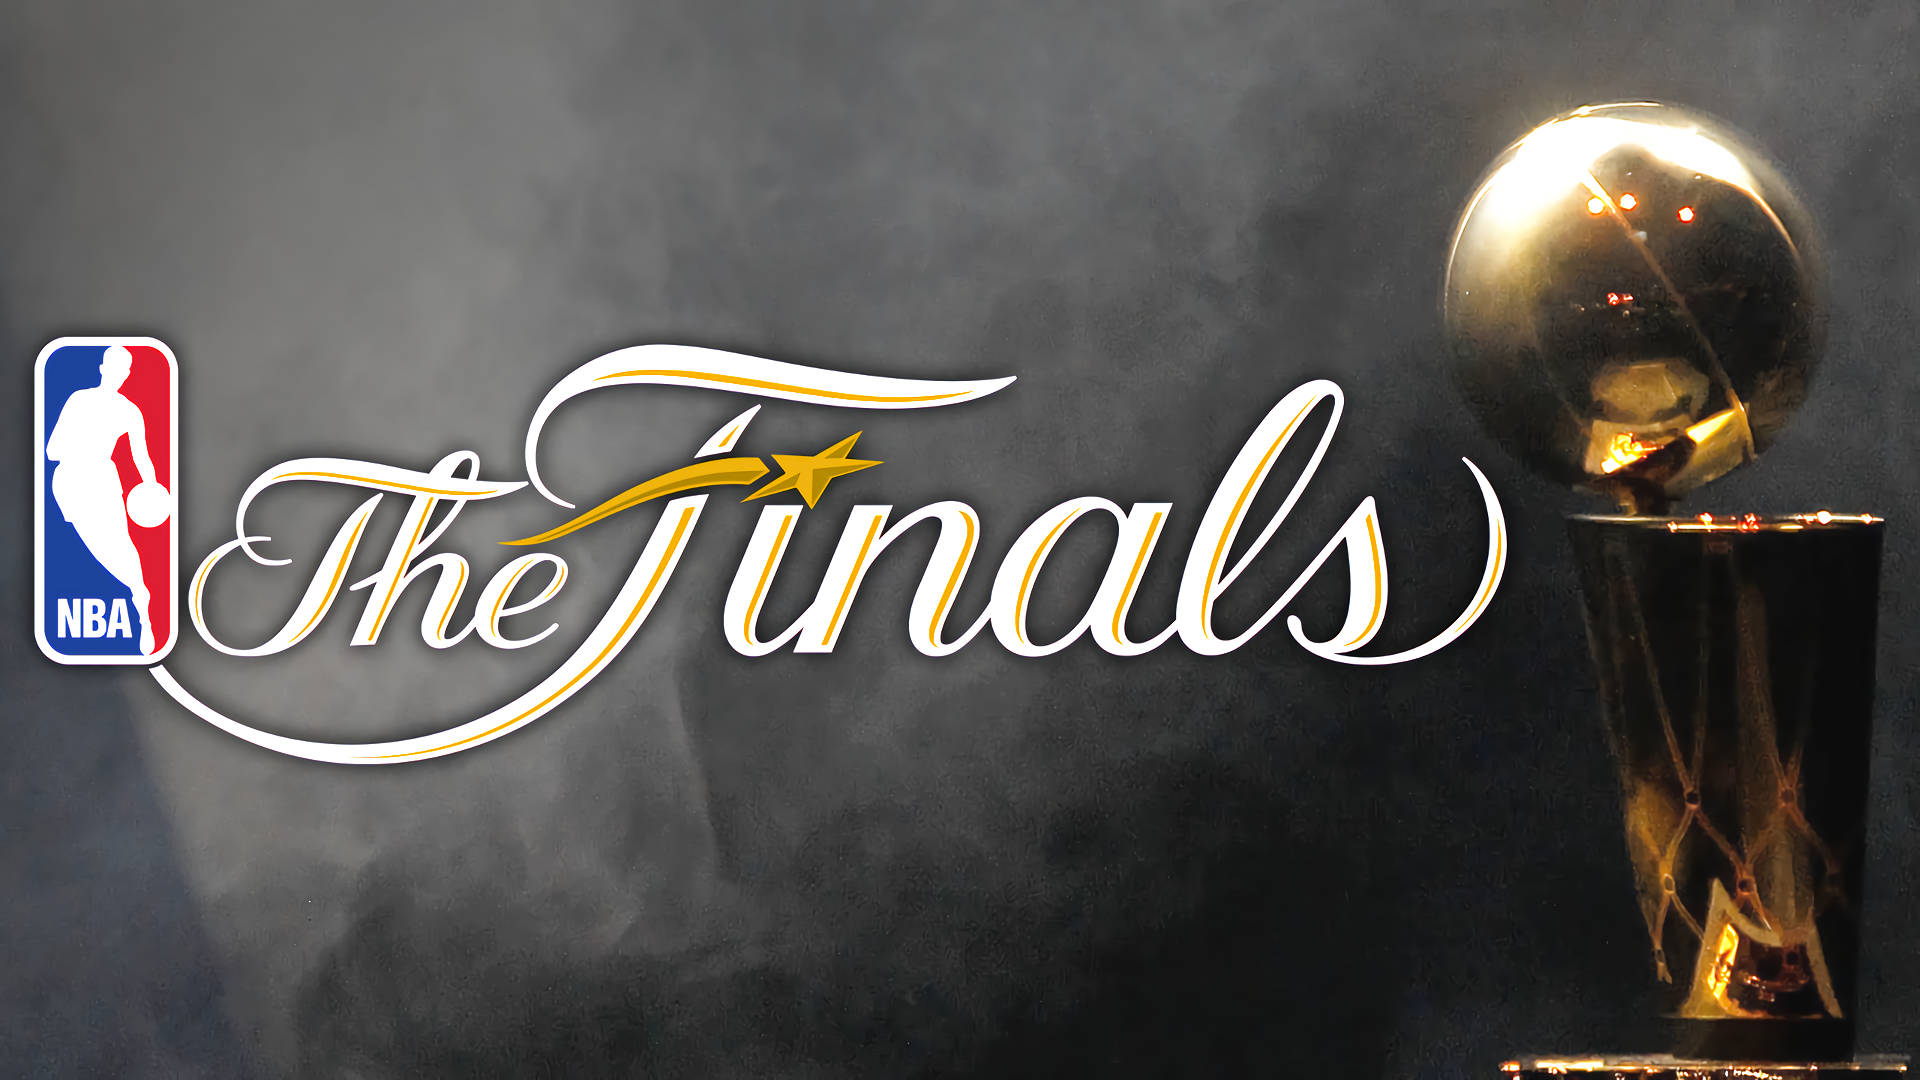 Nba Finals Foggy Poster Background